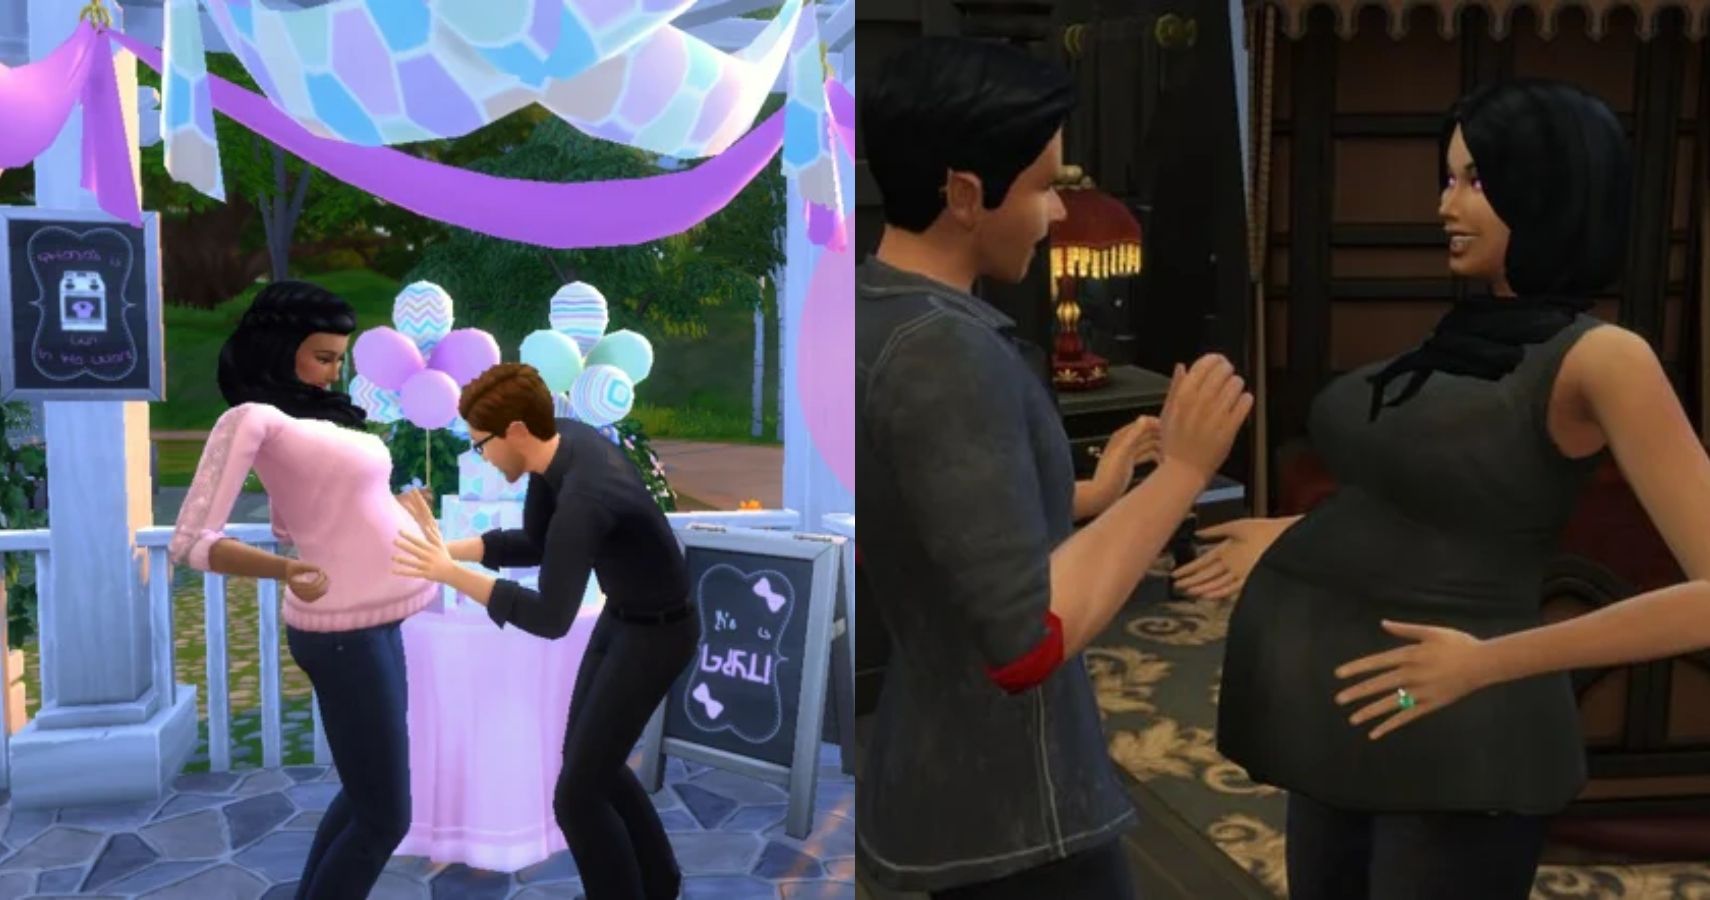 realistic life and pregnancy mod sims 4